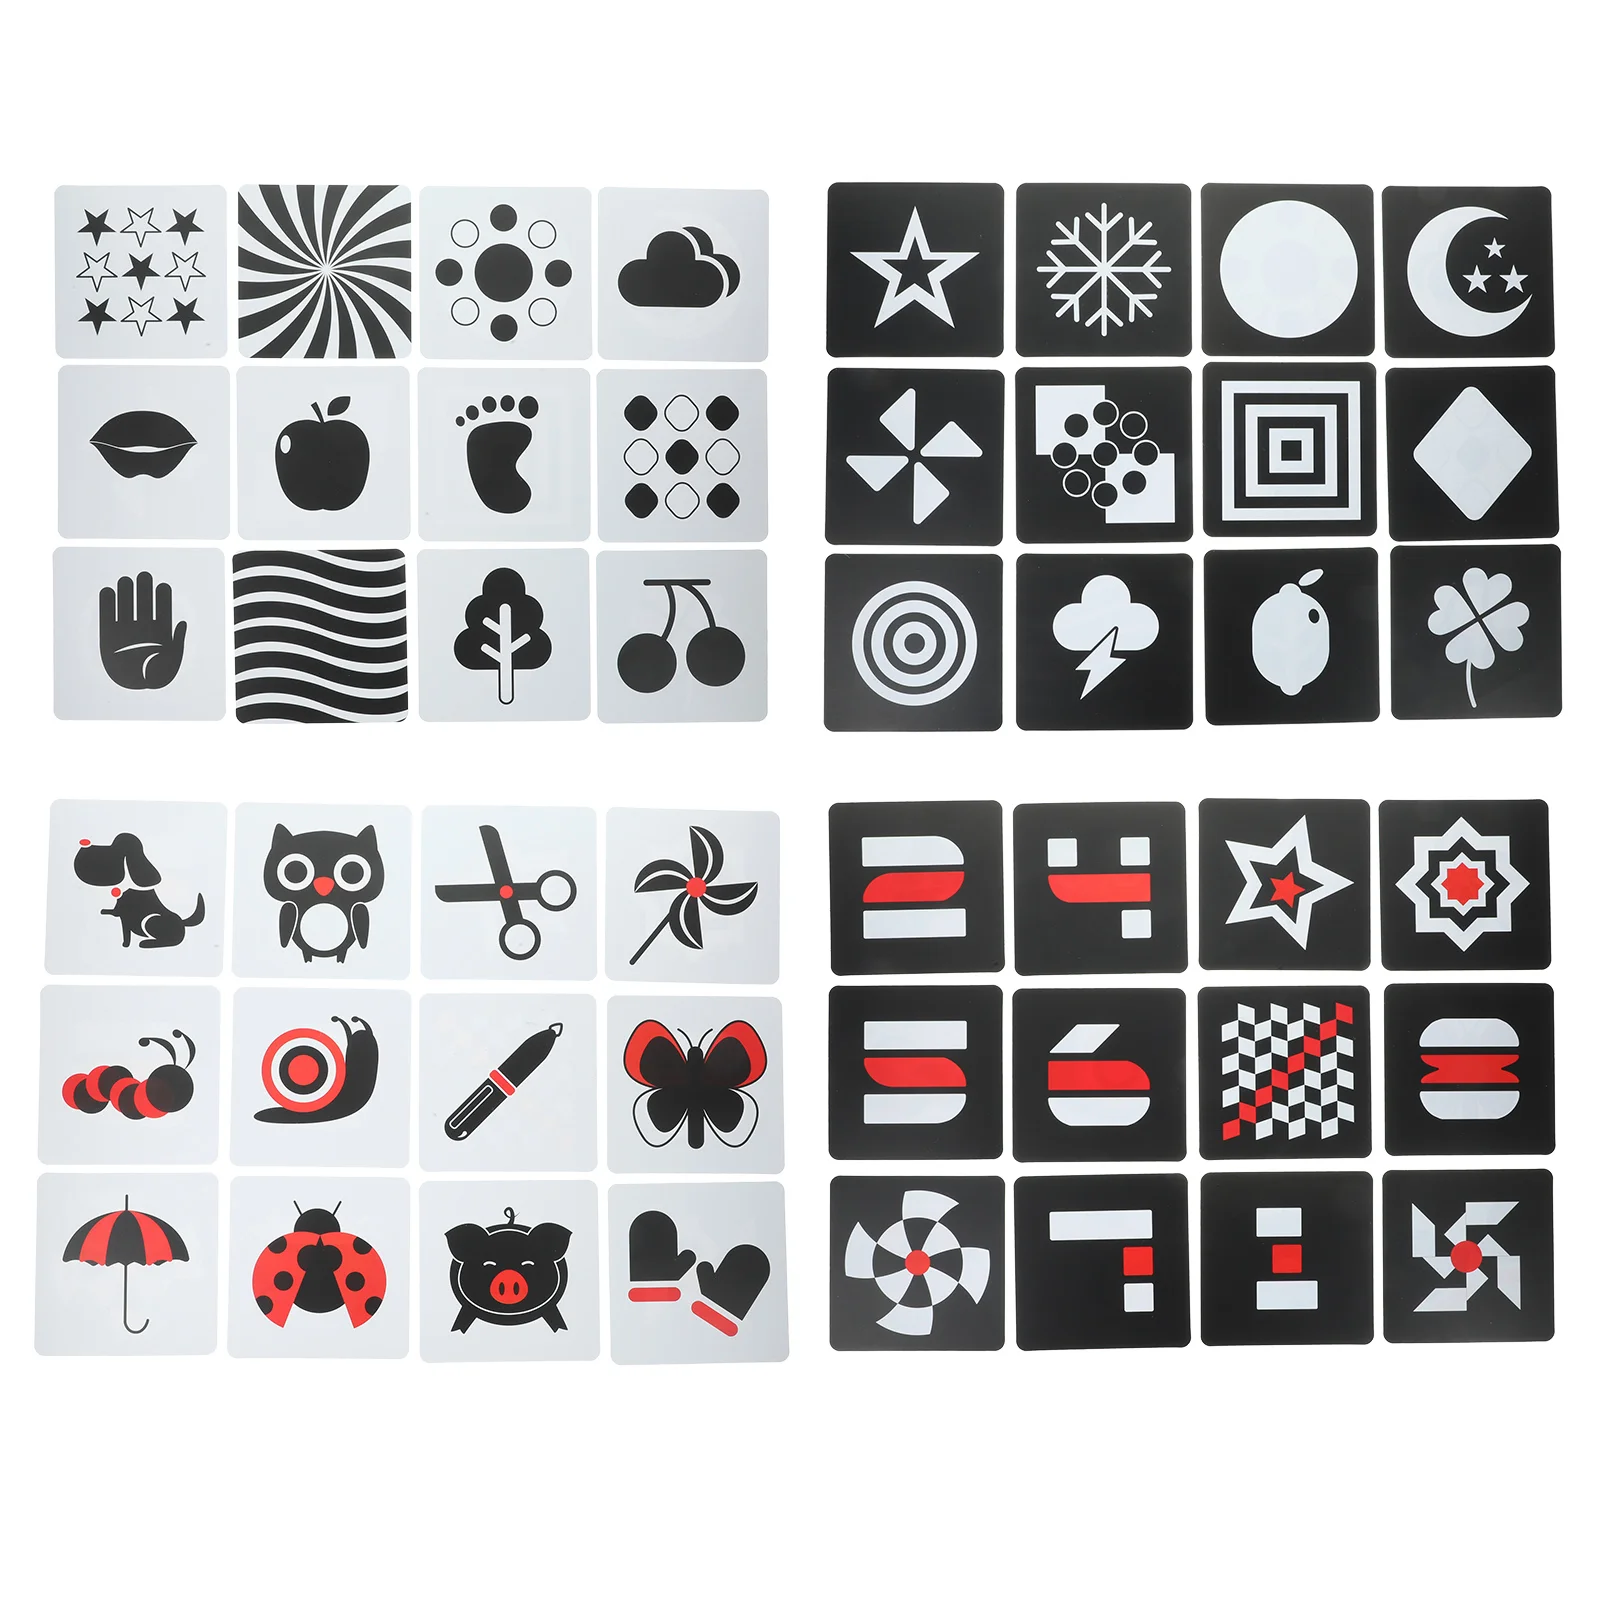 High Contrast Infant Toys Black White Visual Stimulation Cards Kids Activity Cards black white learning cards s visual baby colorlearning flash recognition stimulus educational white flash game black